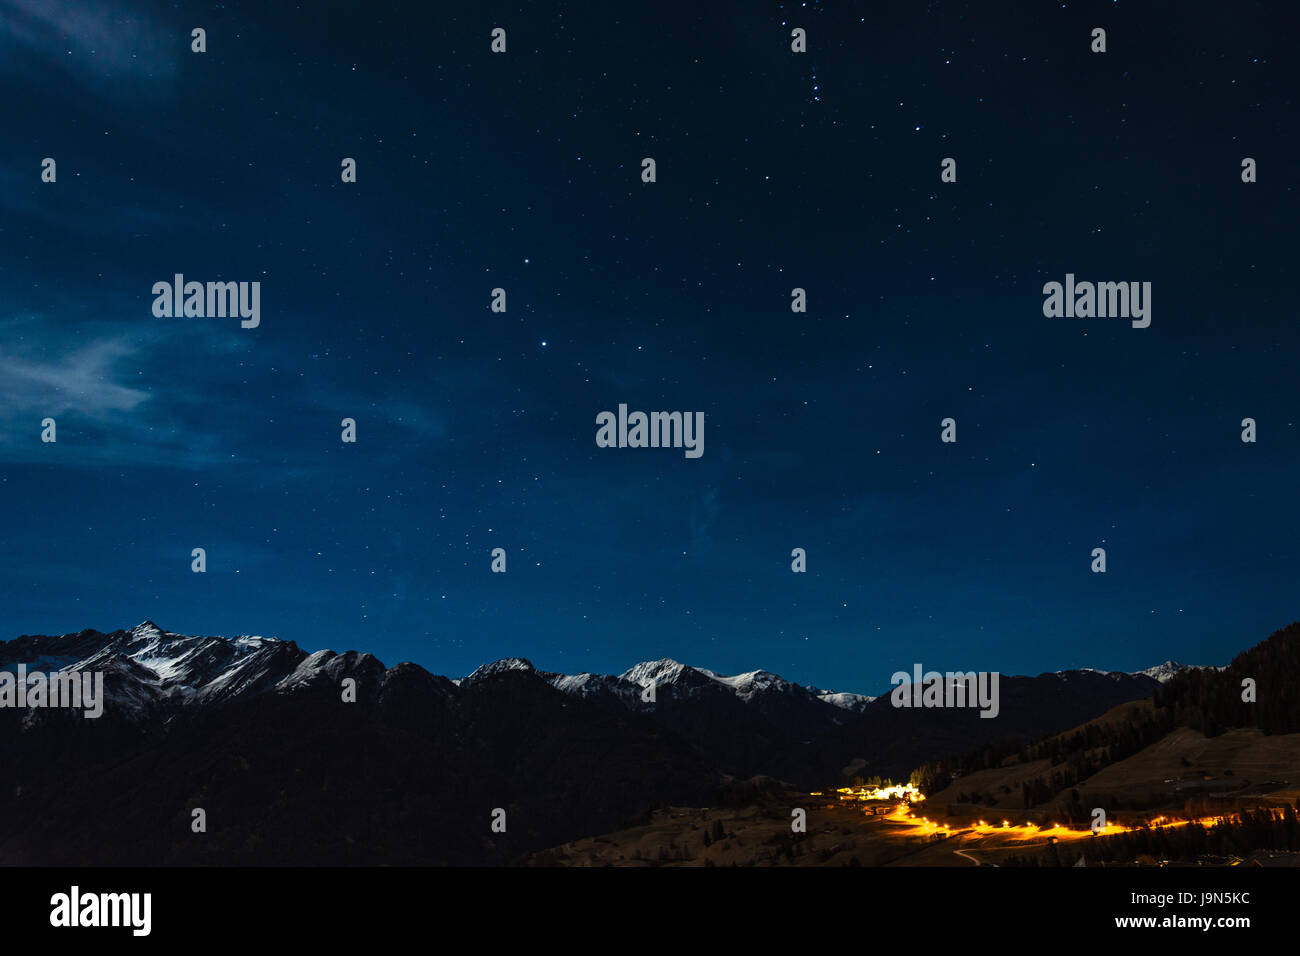 Stars over snowy mountains in Austria Stock Photo